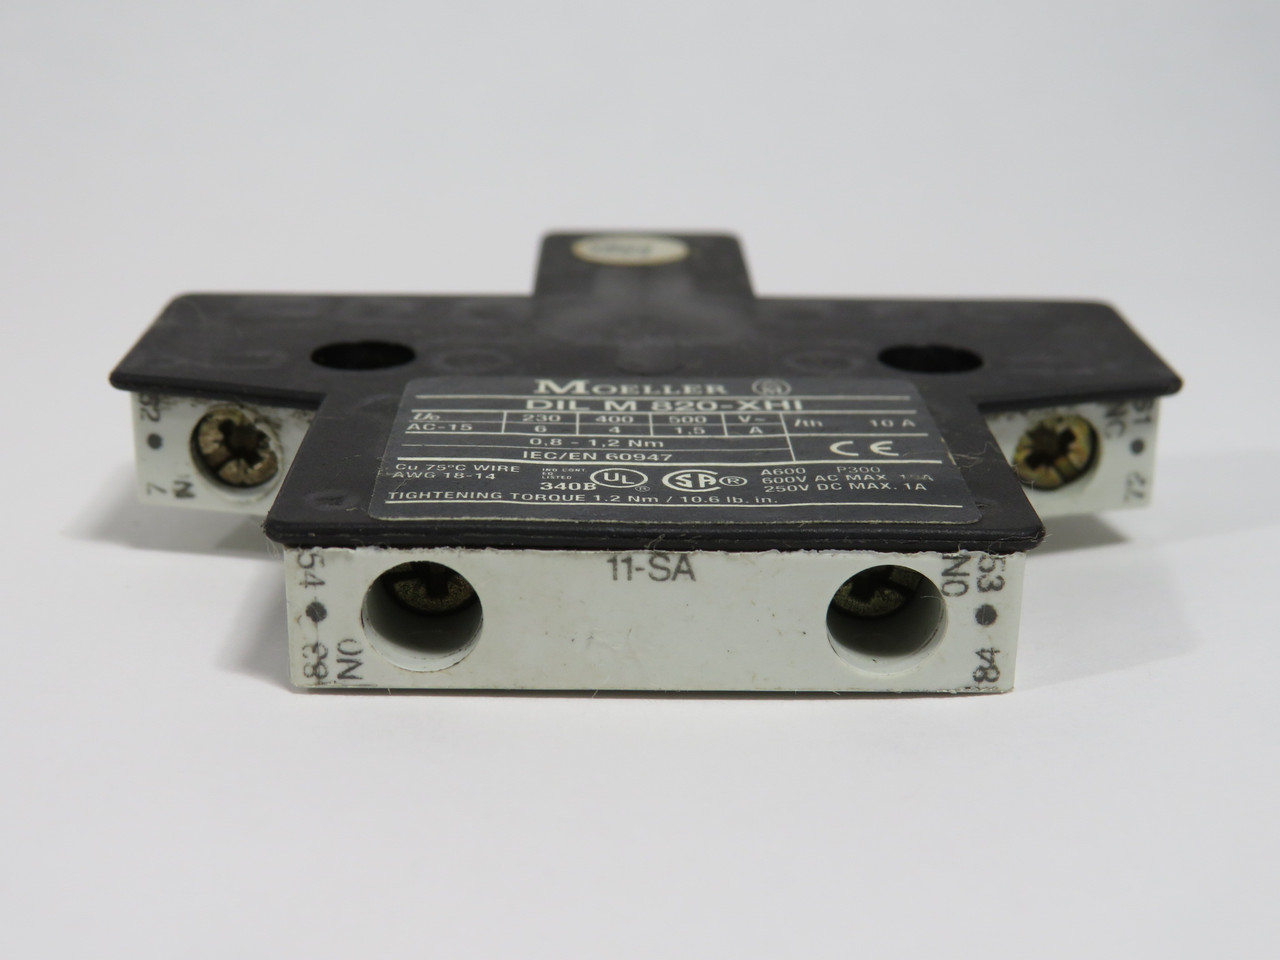 Moeller DILM820-XHI11-SA Auxiliary Contact Block 1NO 1NC 500V COSMETIC WEAR USED